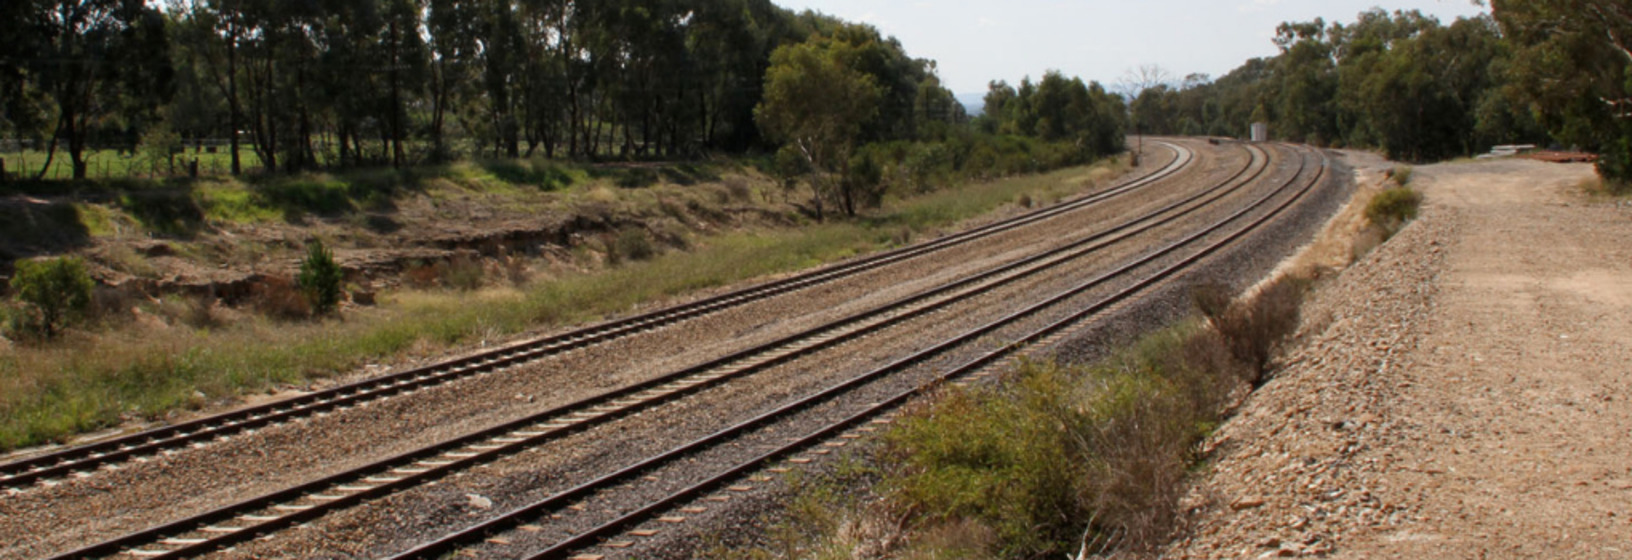 sweeping bend and railway line